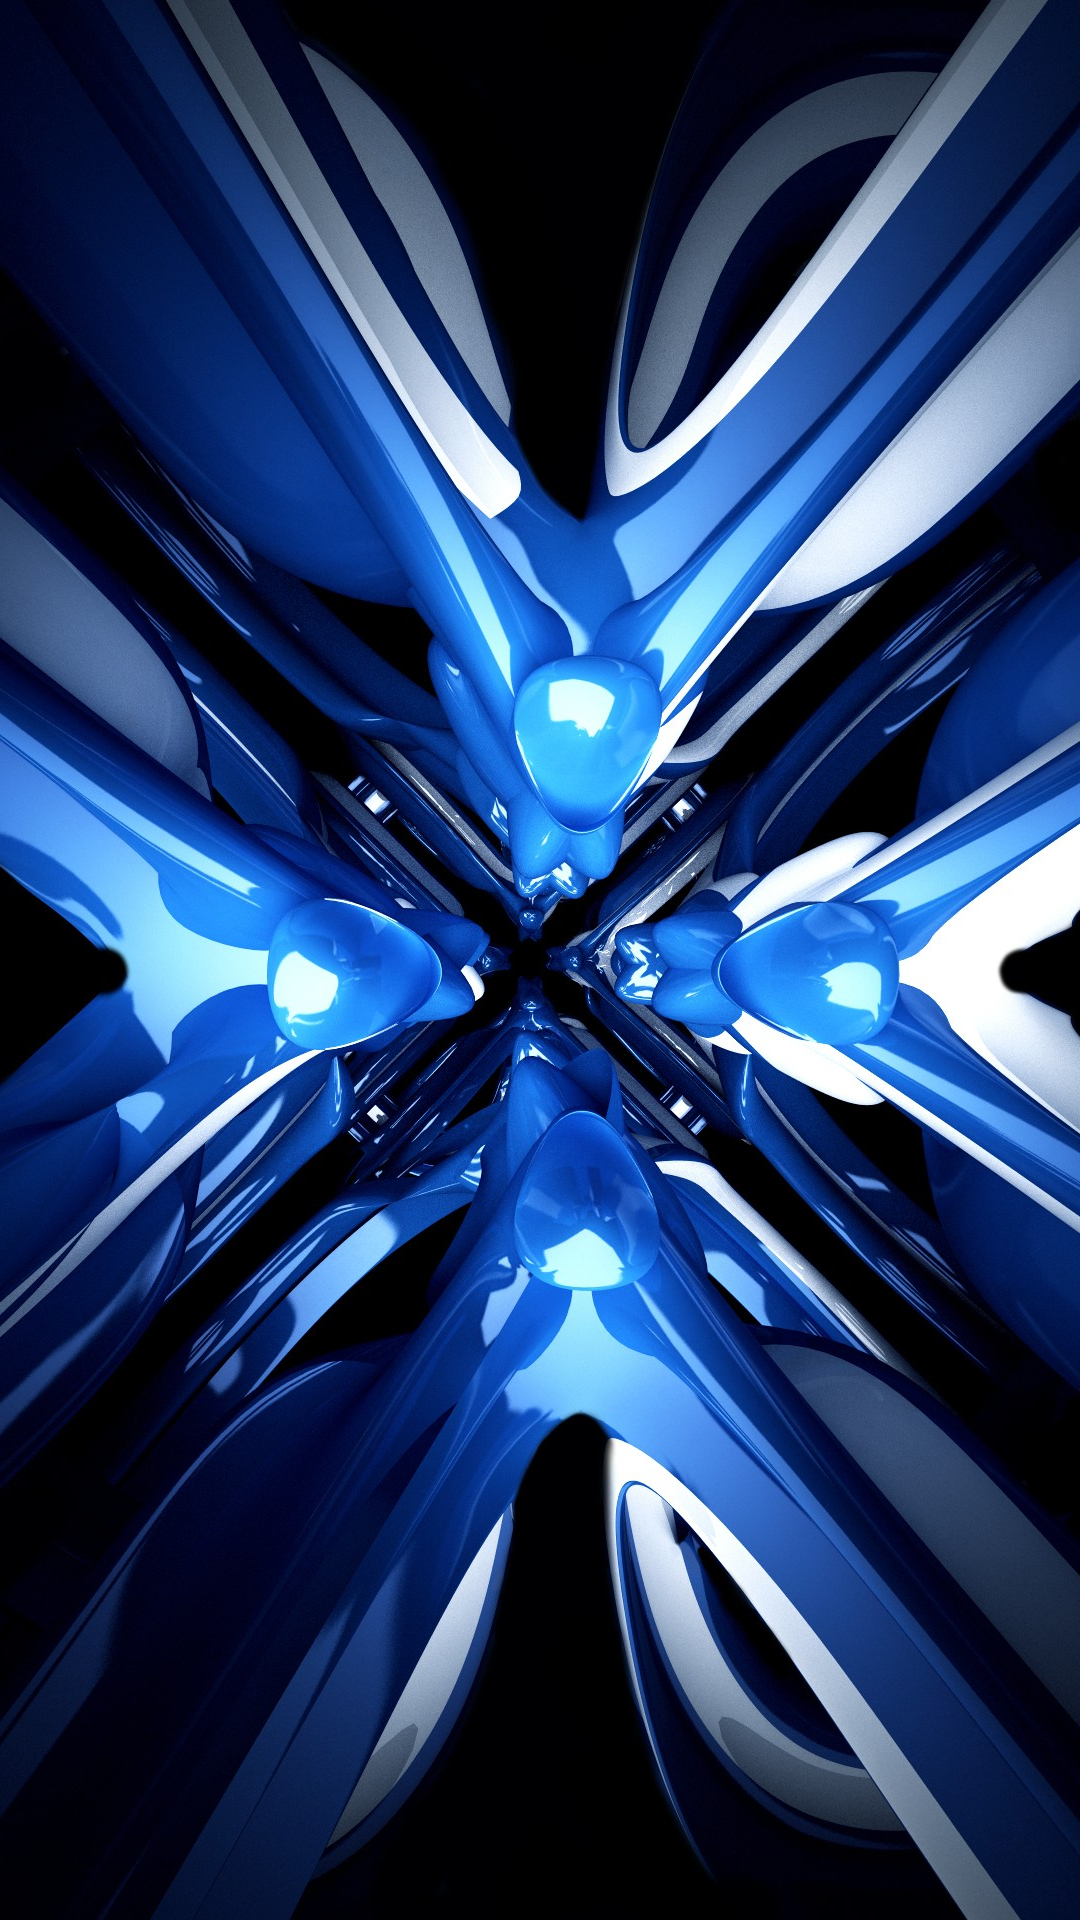 Wallpaper for galaxy s4 with 3D blue shapes in 1080x1920 resolution